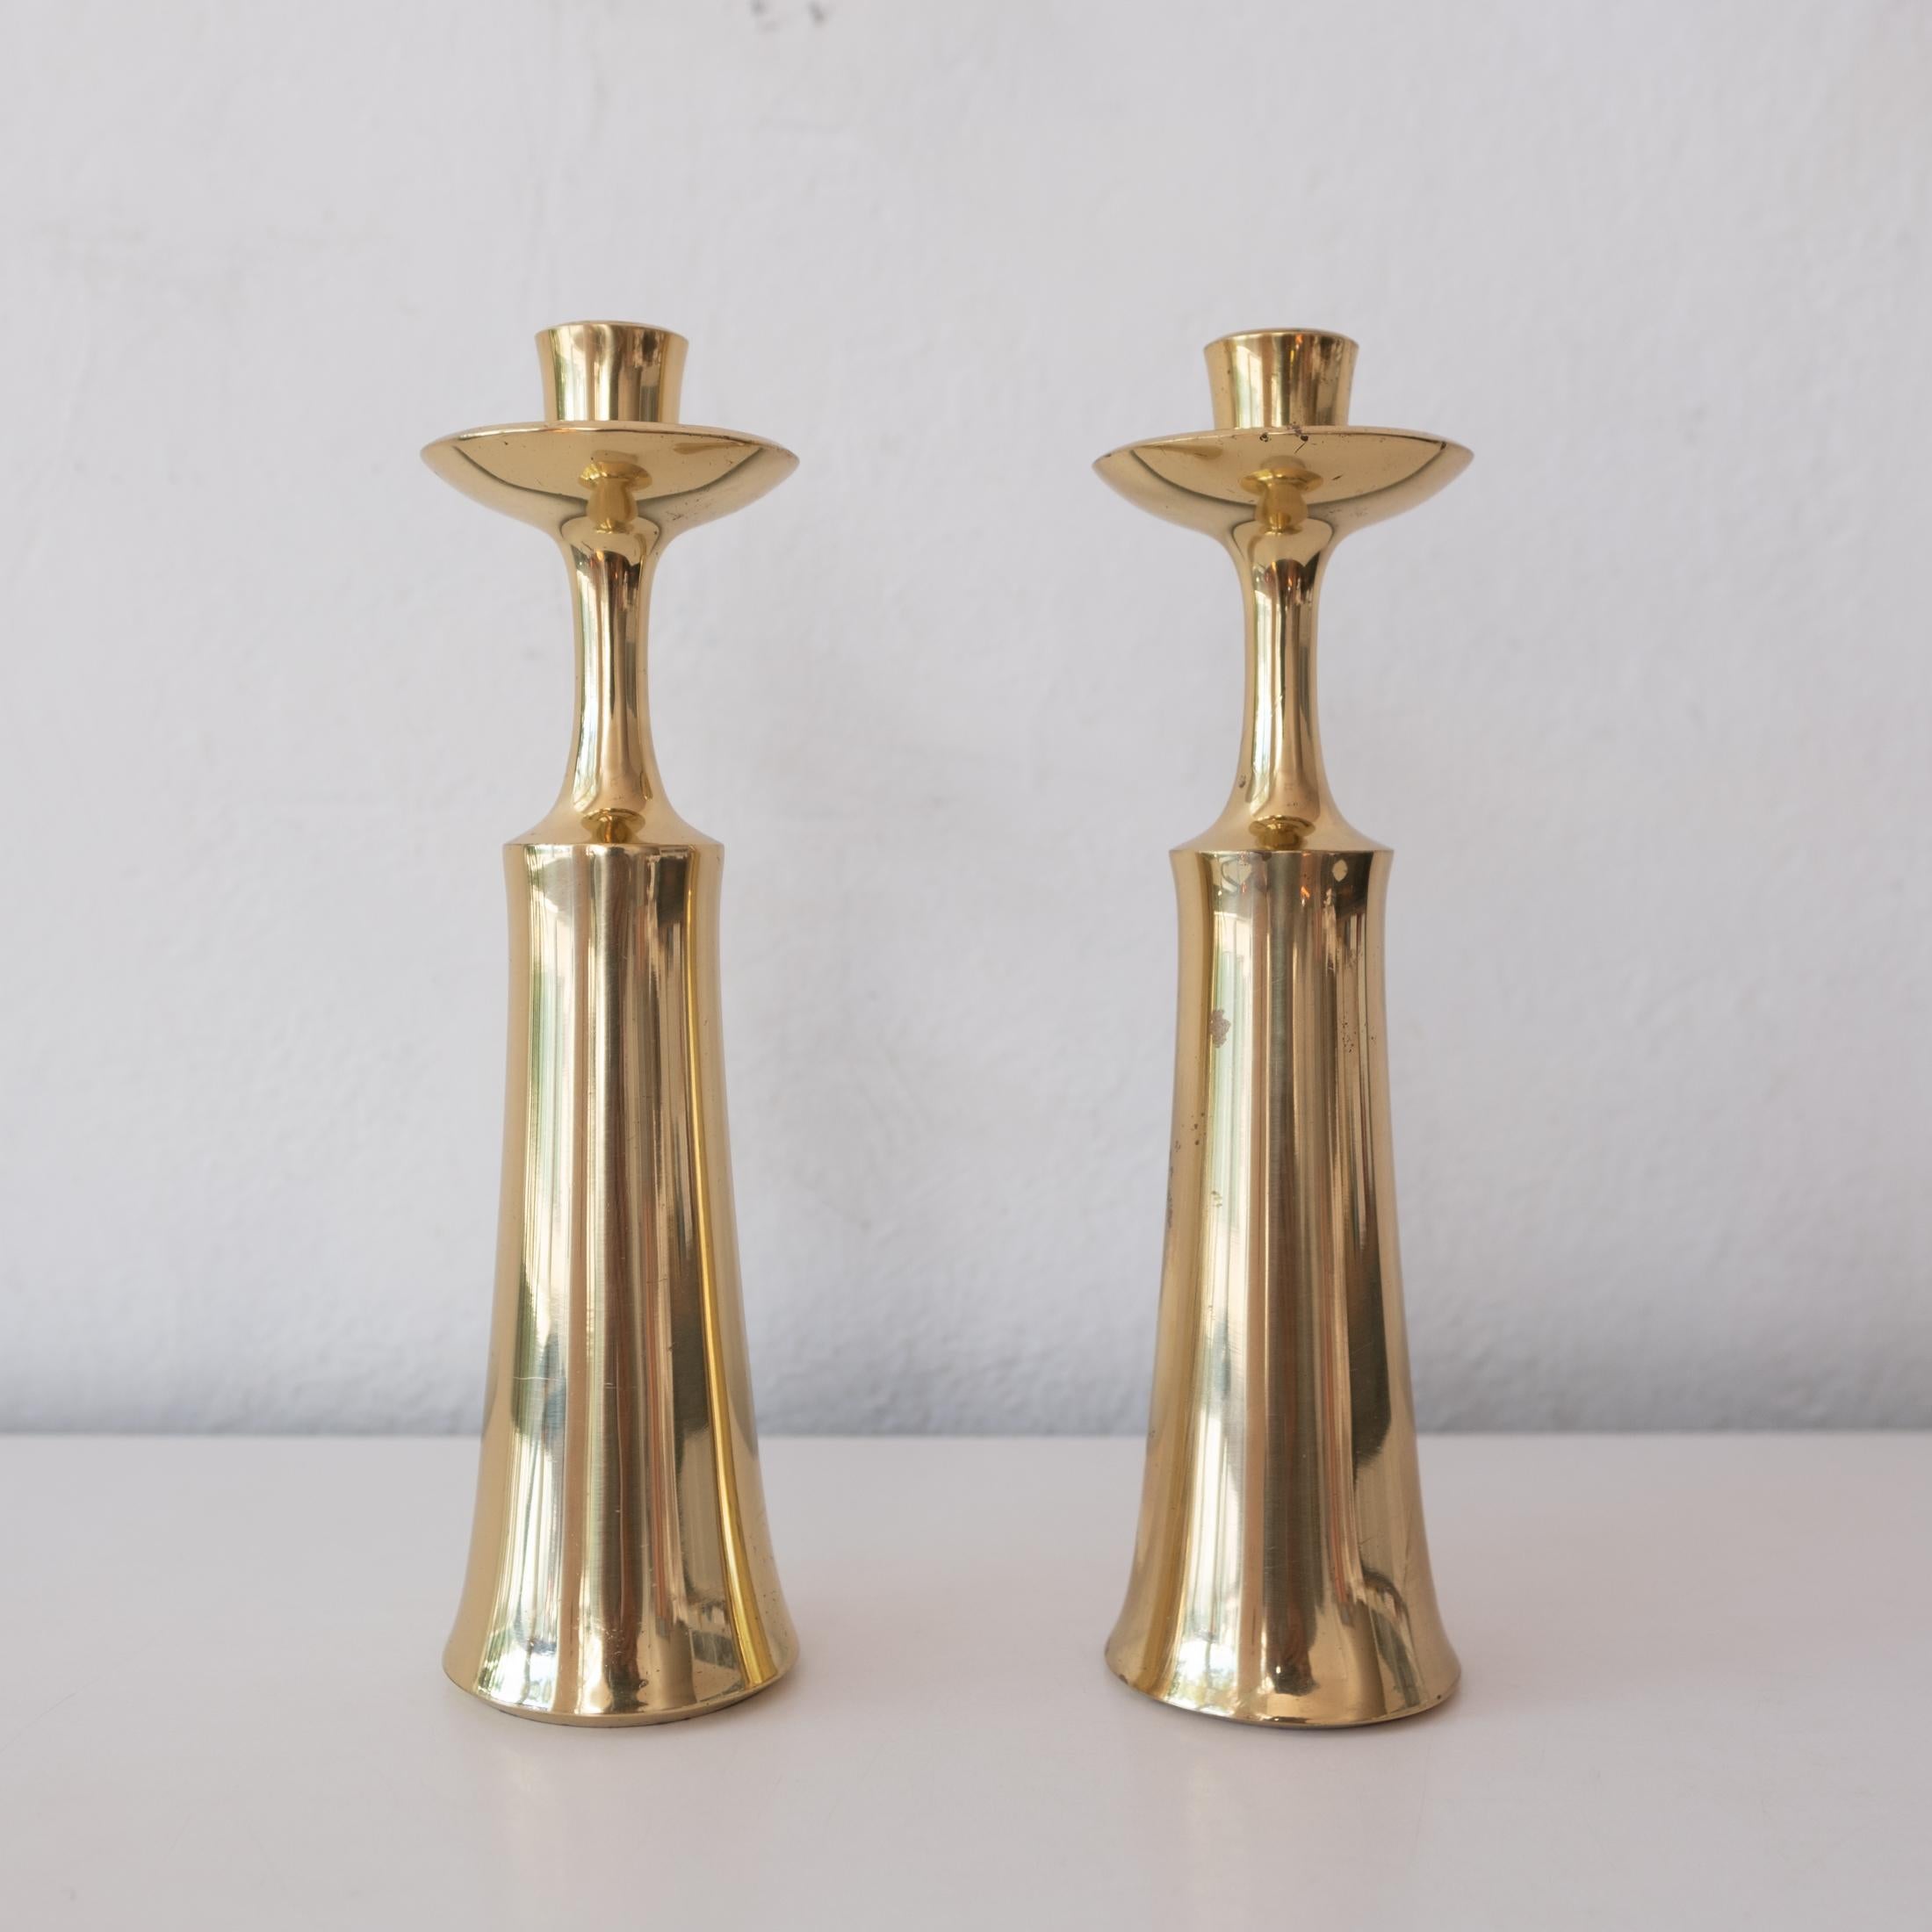 A pair of solid brass candlesticks by Jens Quistgaard for Dansk. Signed on the interior. Made in Denmark, 1950s. 
